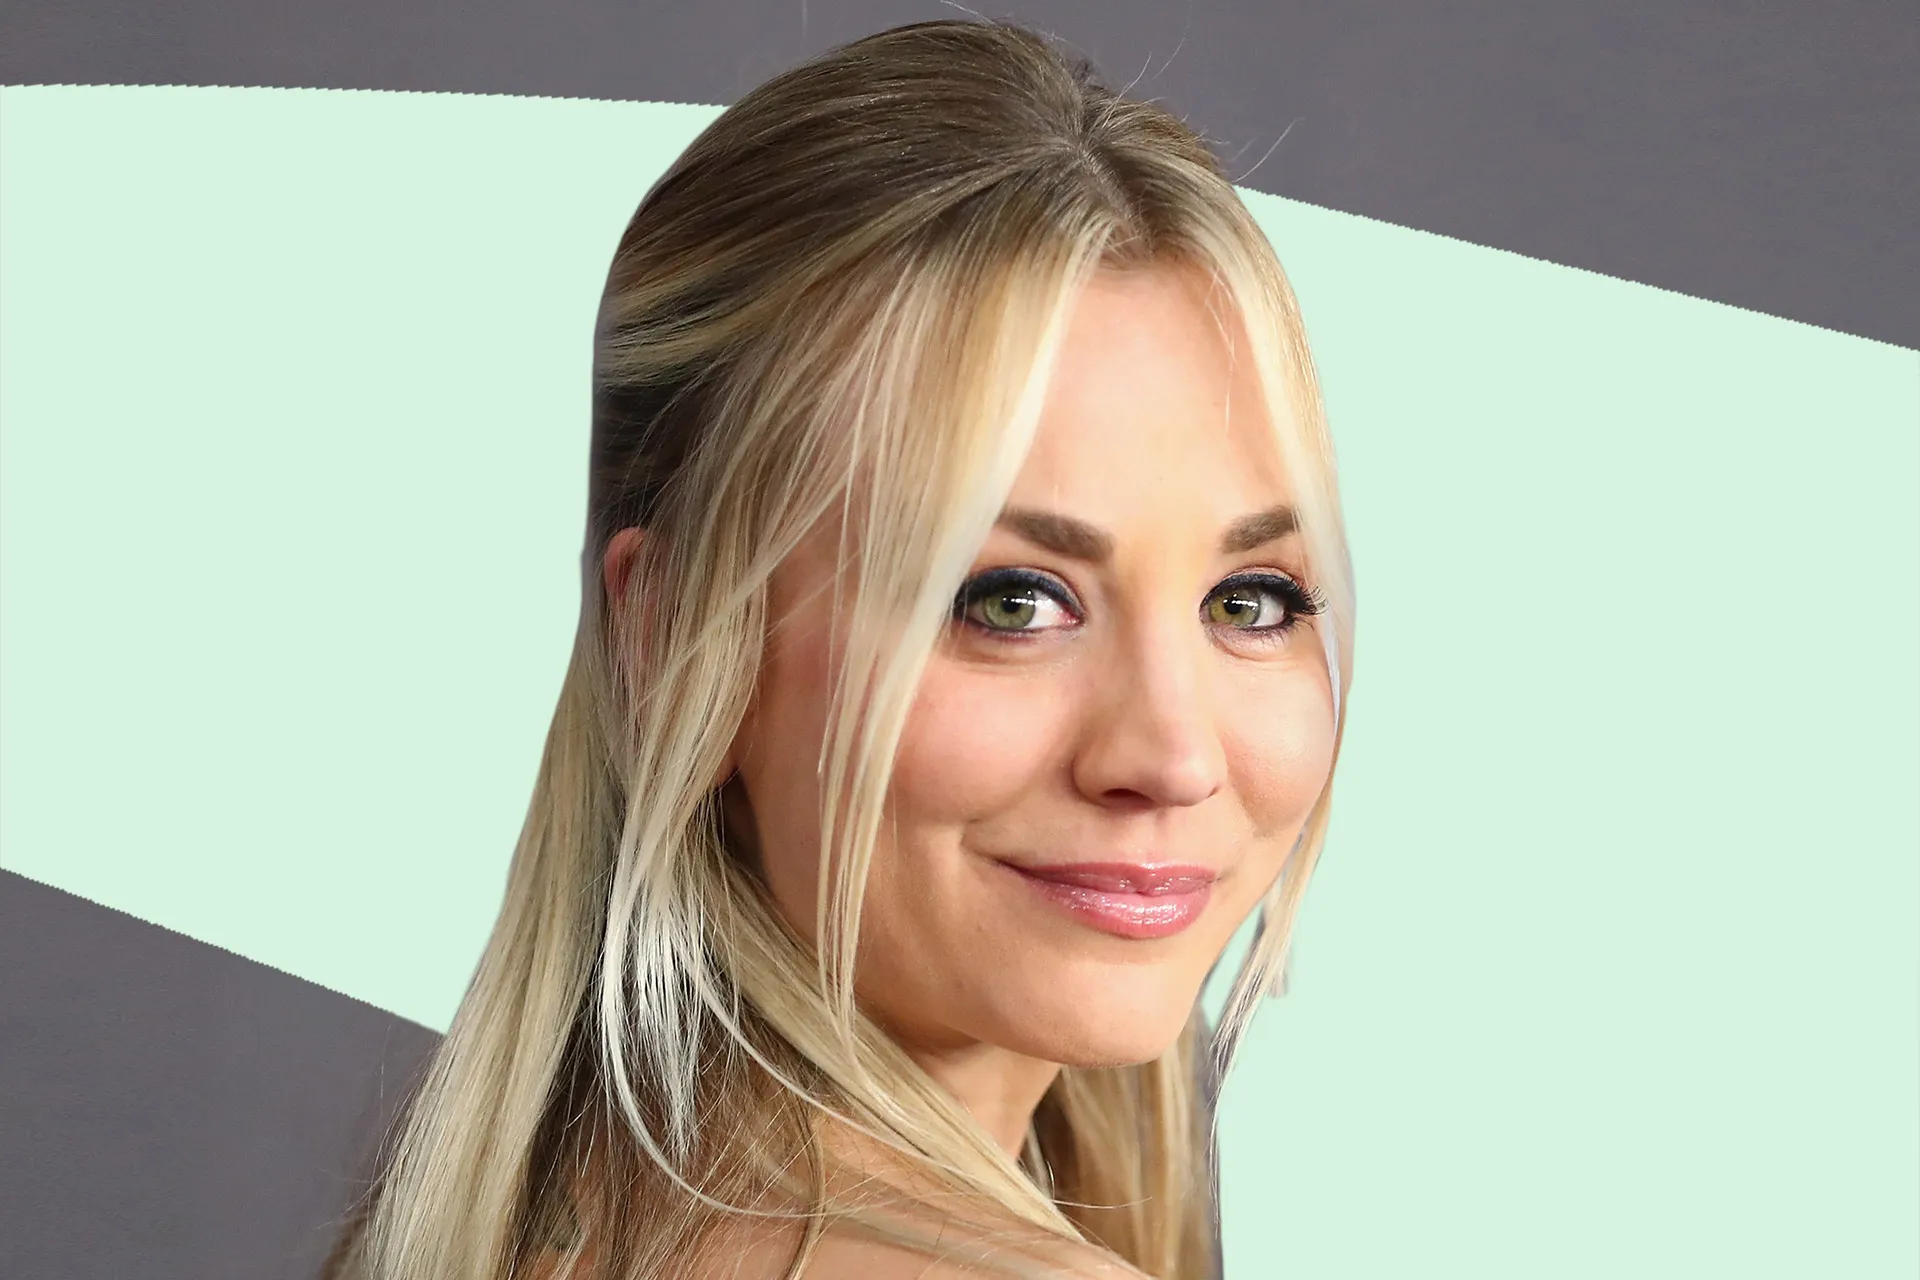 How Kaley Cuoco’s Debut as Penny Saved 'The Big Bang Theory' from Early Cancellation: A Look at the Show’s Critical Pivot